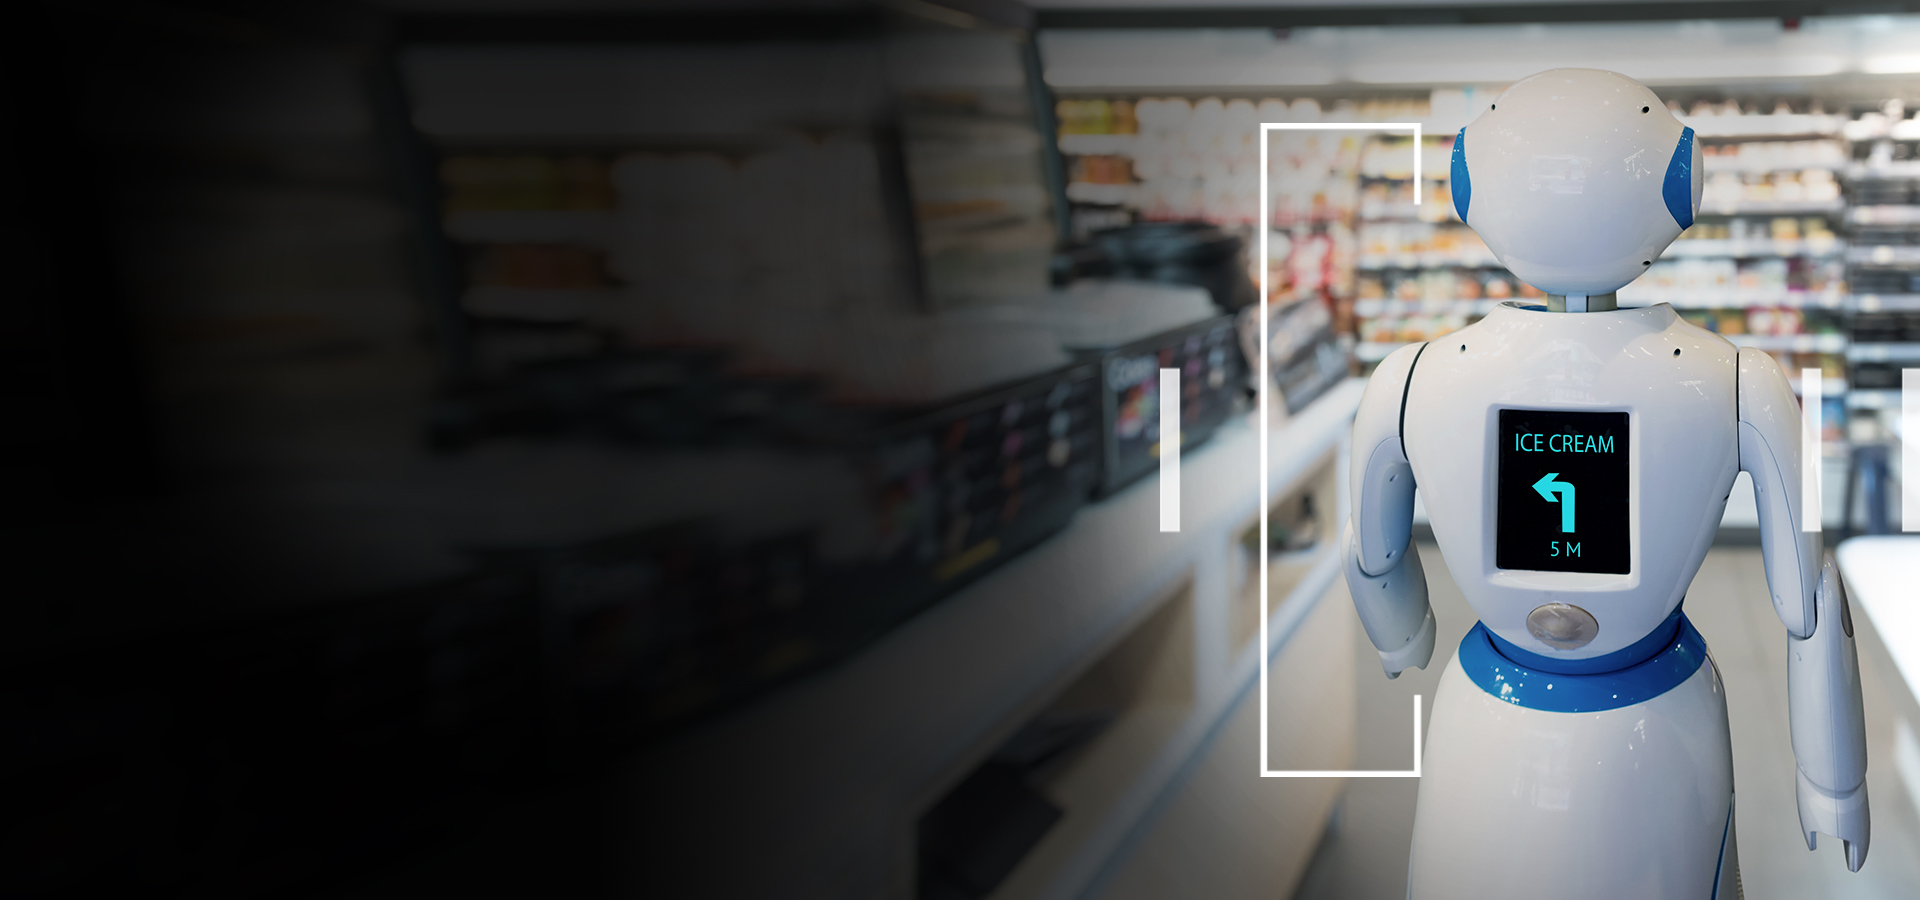 The new revolution in retail operations - Intelligent Store